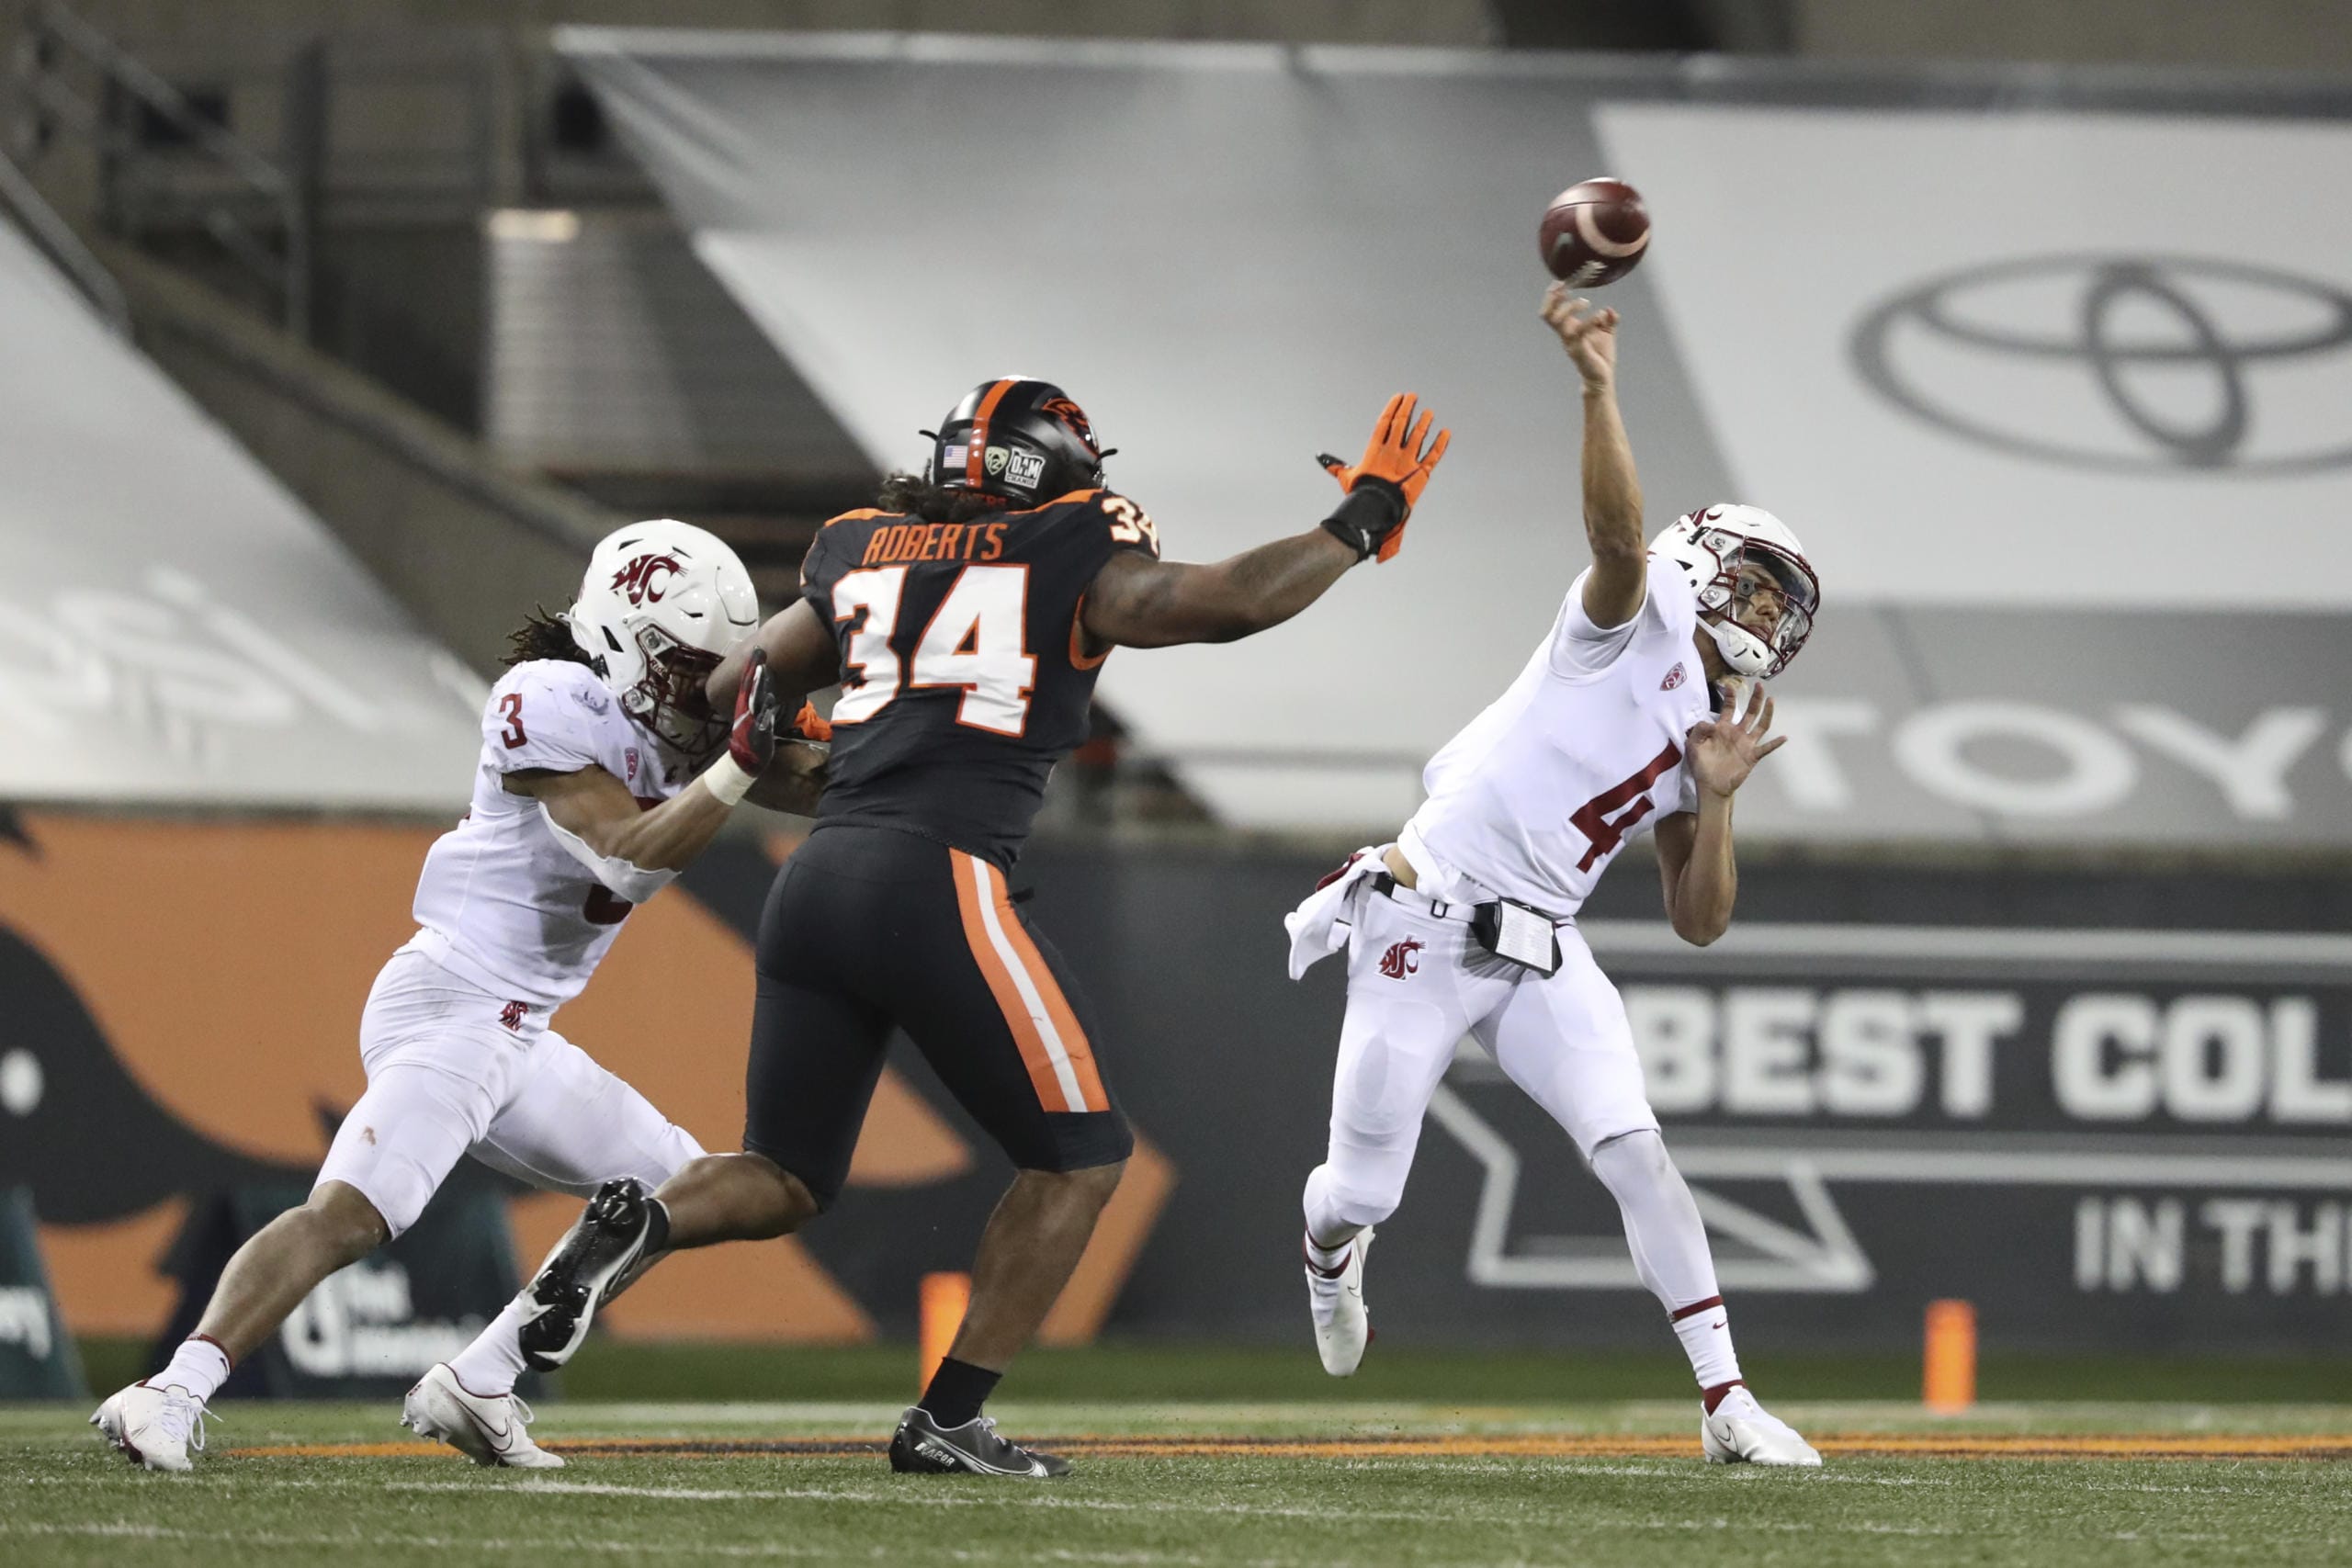 Washington State quarterback Jayden de Laura (4) throws past Oregon State inside linebacker Avery Roberts (34) and Washington State's Deon McIntosh (3) during the first half of an NCAA college football game in Corvallis, Ore., Saturday, Nov, 7, 2020.